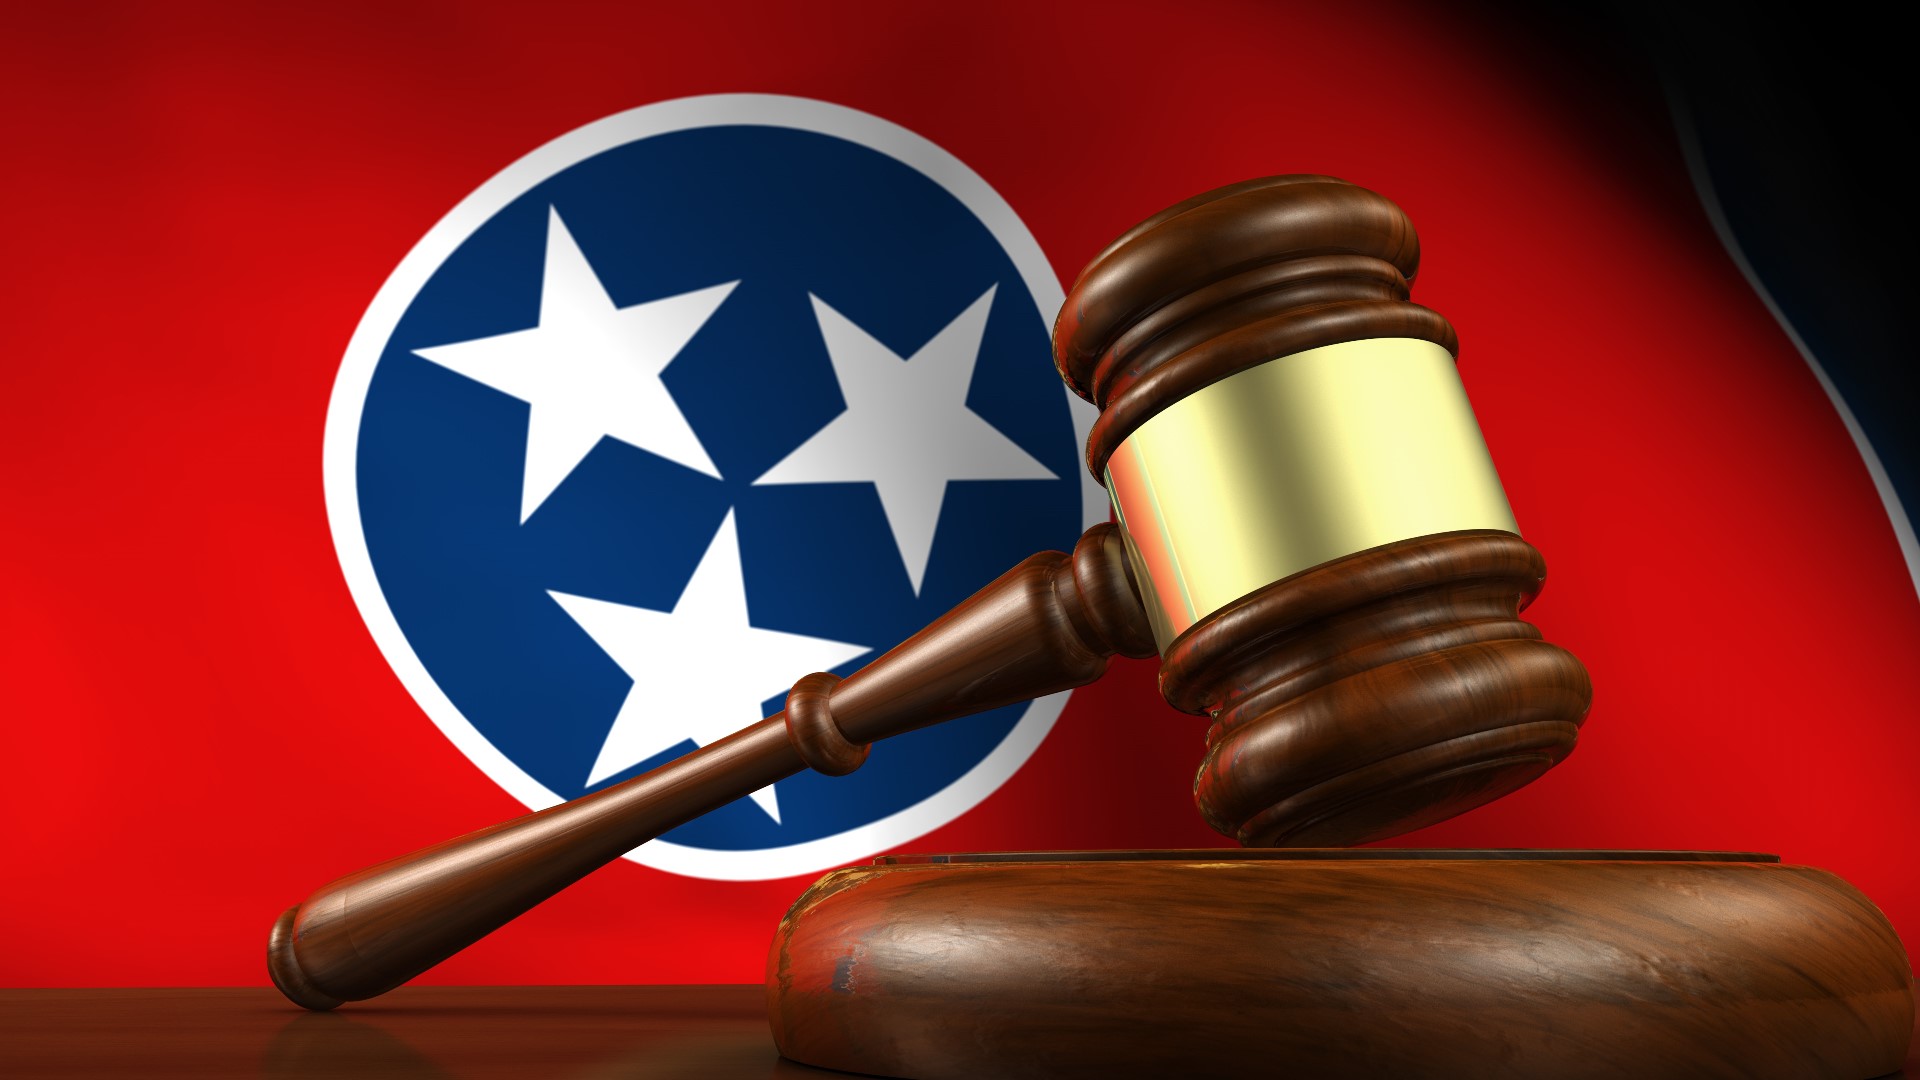 The lawsuit — filed by Tennessee and six other states — claims a rule unjustifiably restrains athletes, and with NIL in place, holds them back from making money.